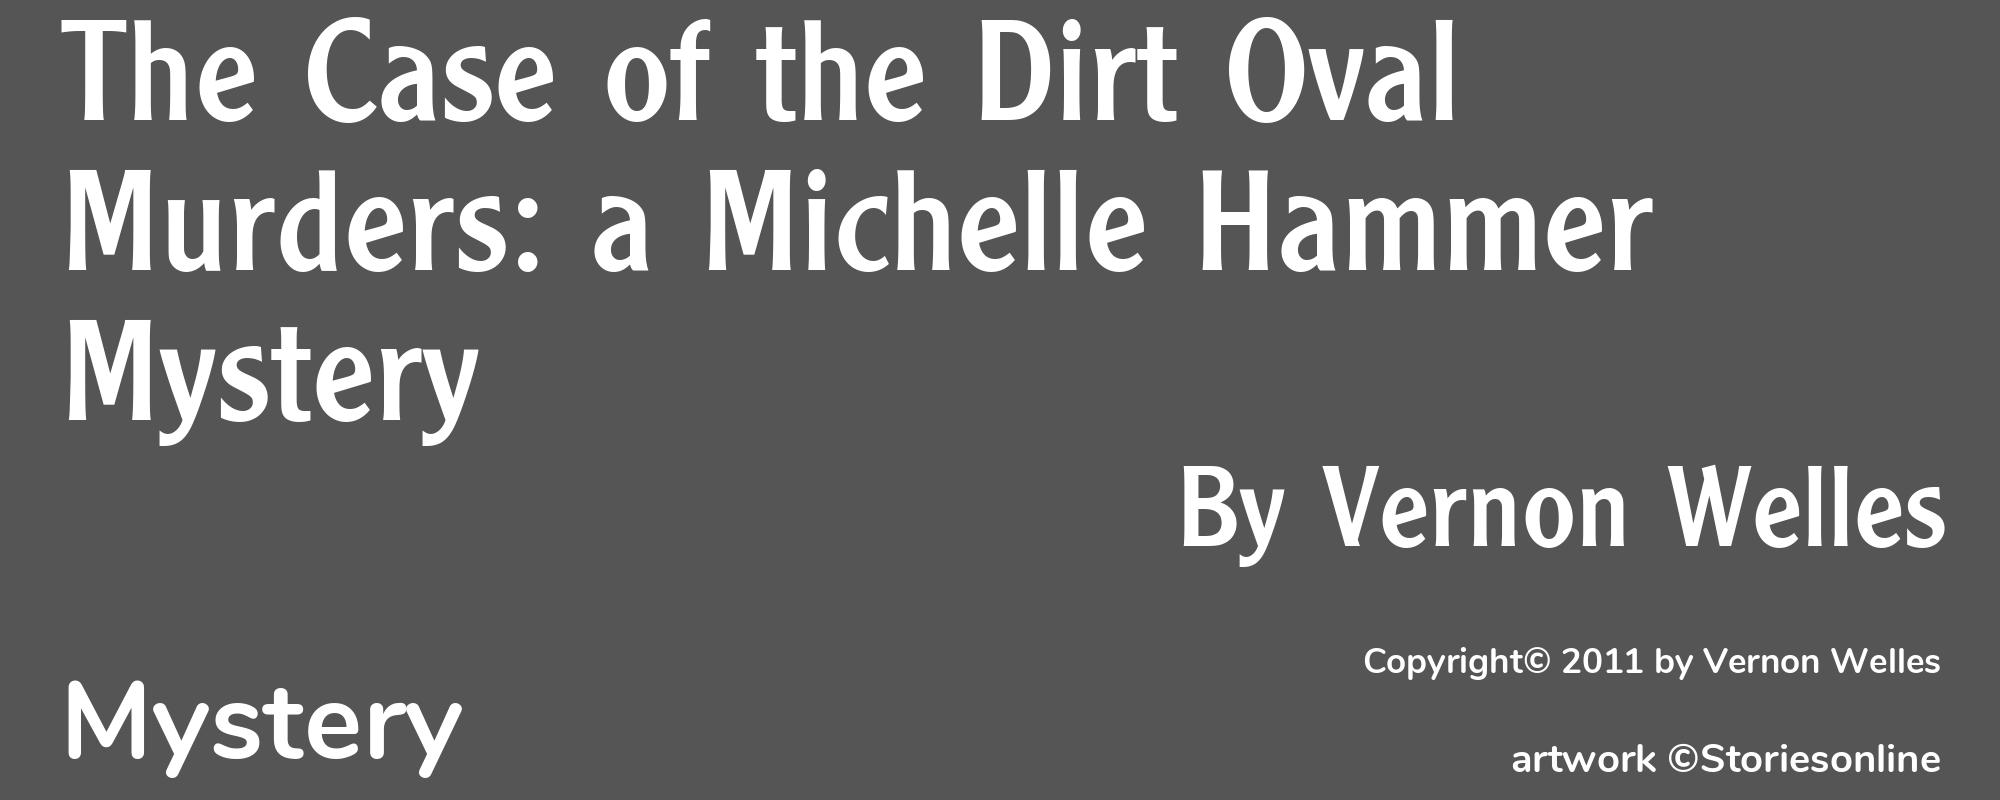 The Case of the Dirt Oval Murders: a Michelle Hammer Mystery - Cover